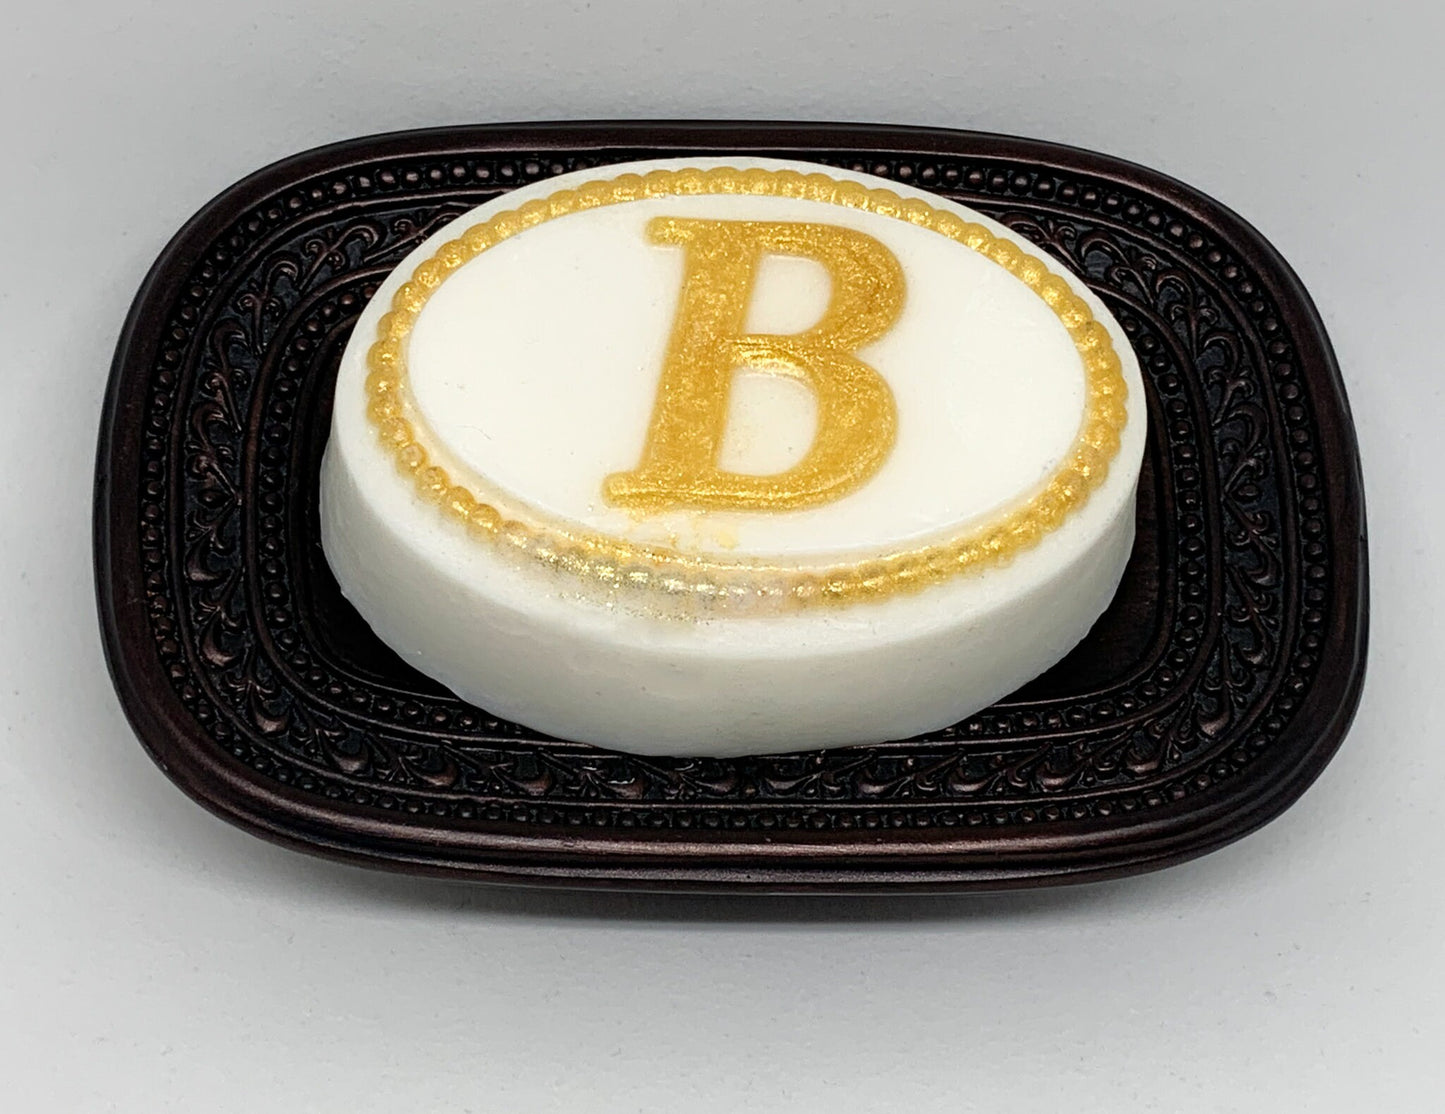 Monogram Soap, Personalized gift, Shea Butter Soap